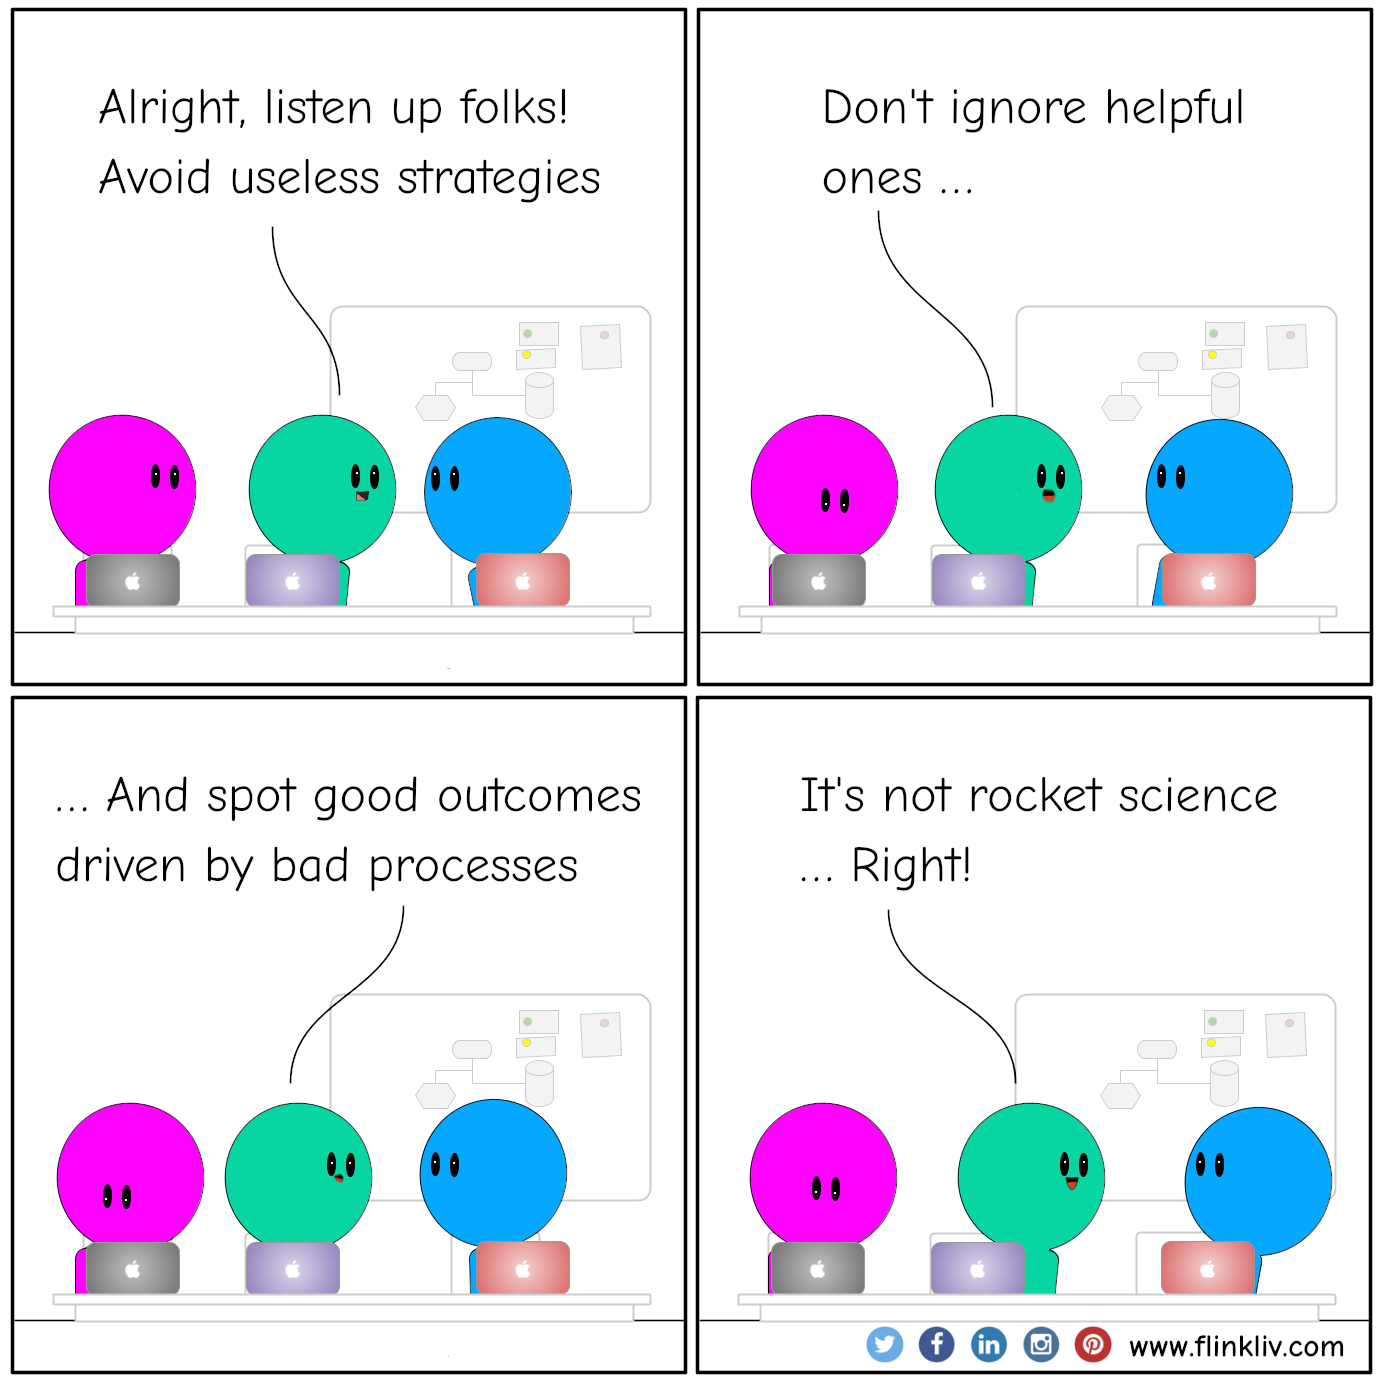 Conversation between A and B about the importance of avoiding useless strategies
    A: Alright, listen up folks! 
    A: Avoid useless strategies
    A: Don't ignore helpful ones, 
    A: and spot good outcomes driven by bad processes. 
    A: It's not rocket science, right?.
    By flinkliv.com